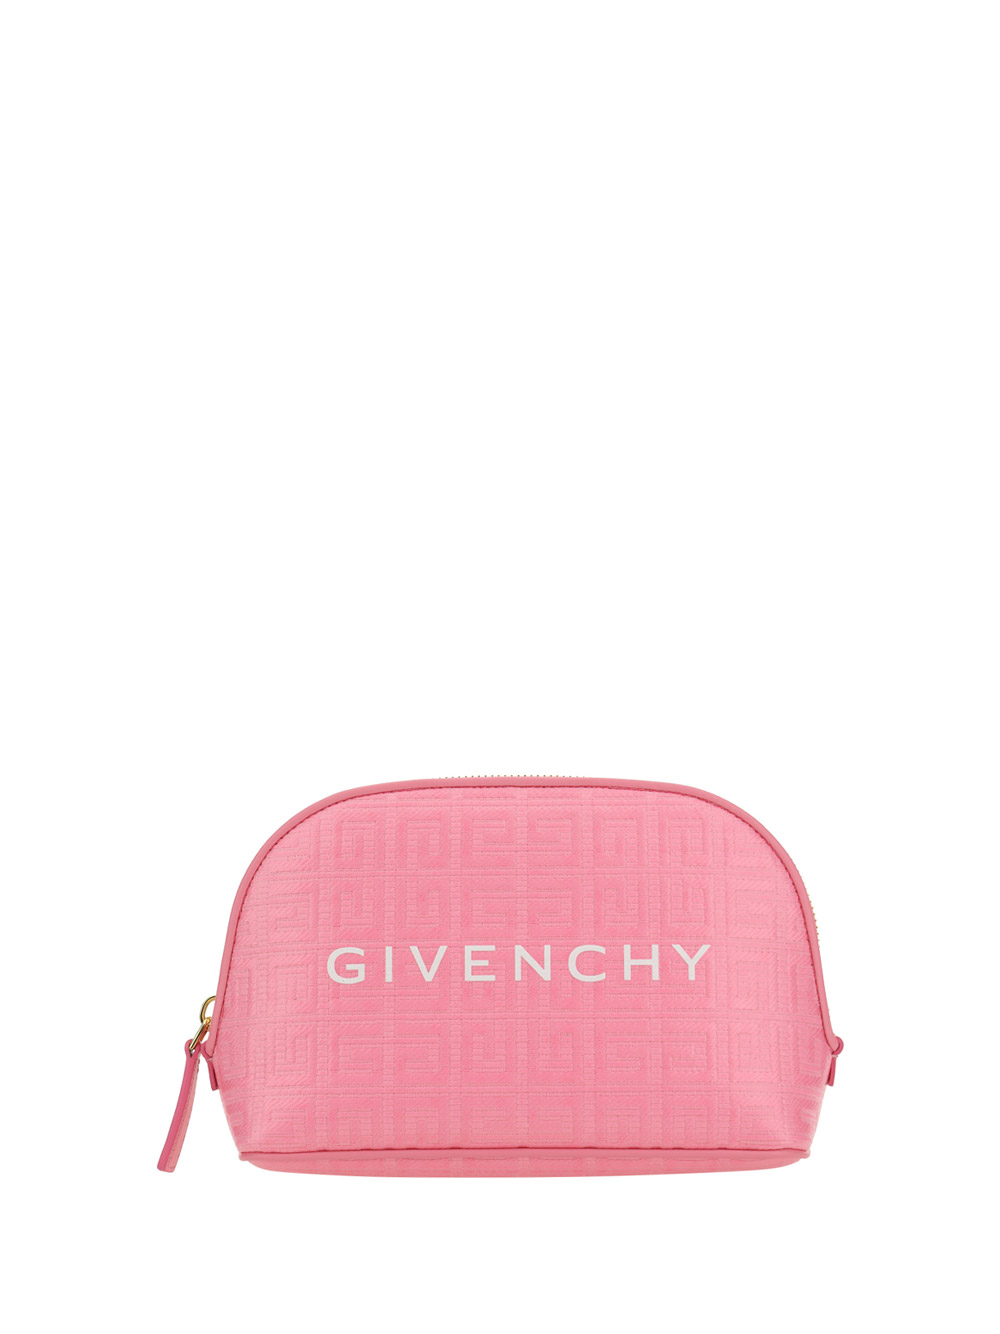 Givenchy G-essentials Pouch In Bright Pink | ModeSens